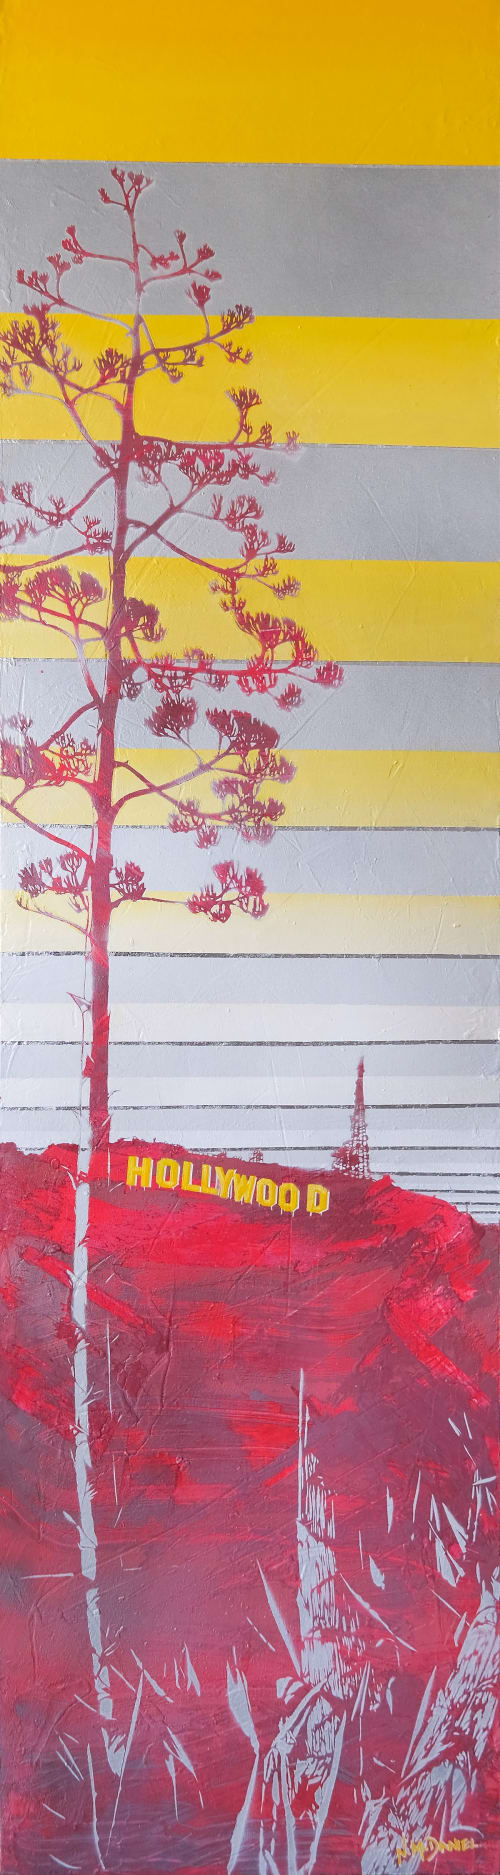 Hollywood | Paintings by Nichole McDaniel